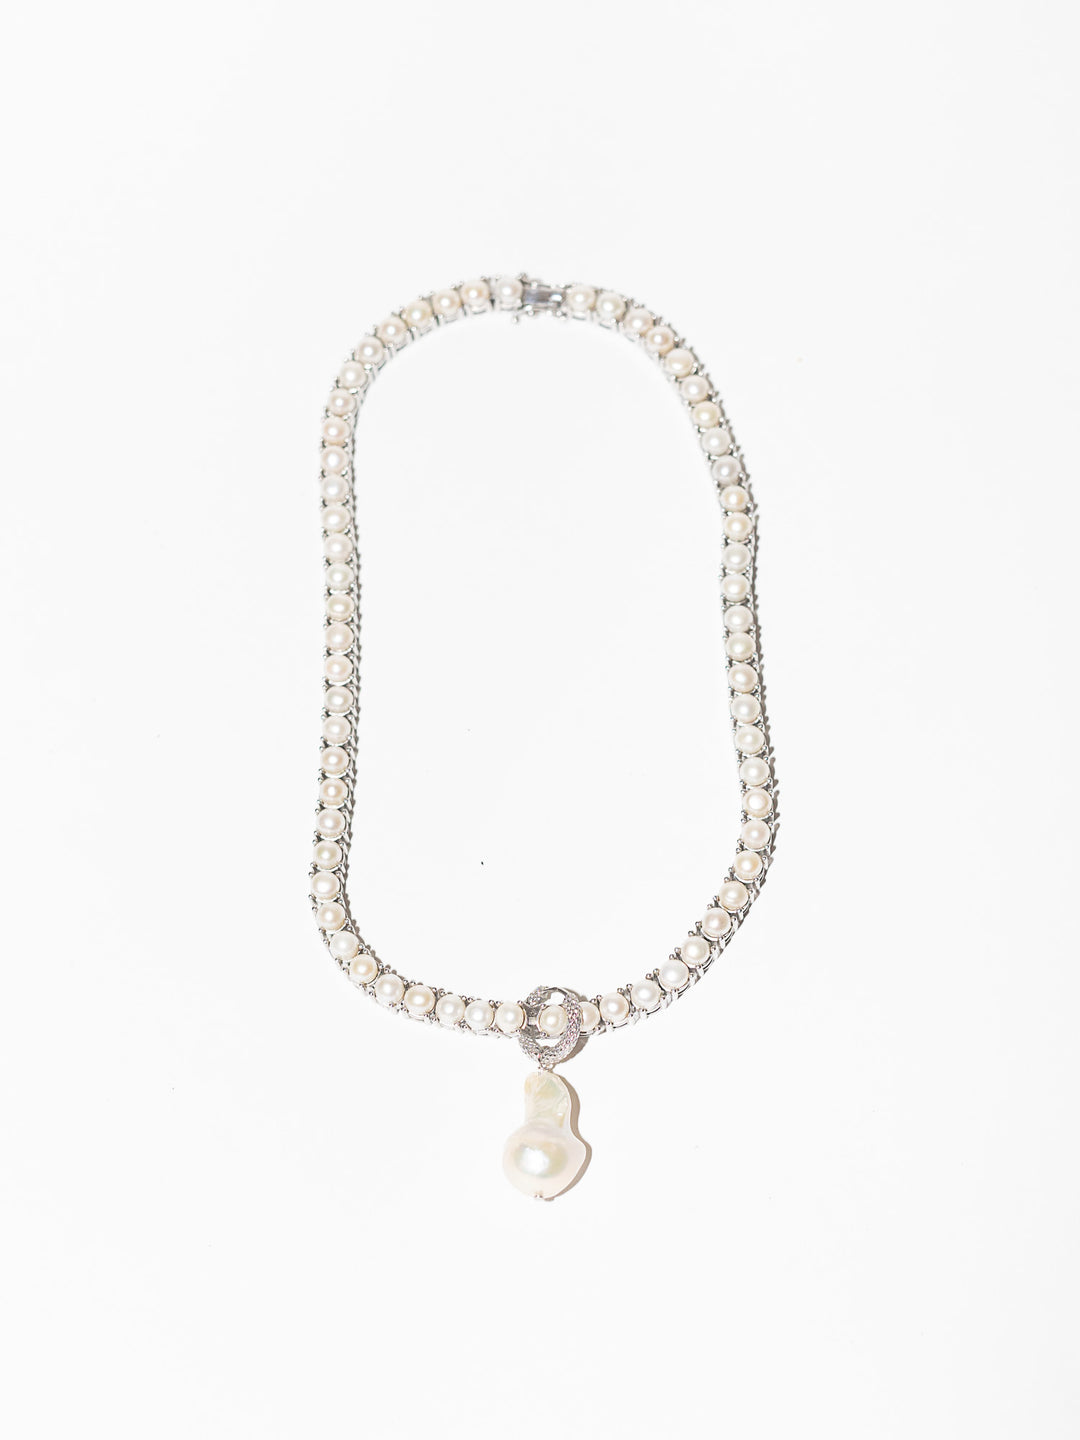 SINGLE SILVER PEARL EARRING AND PENDANT